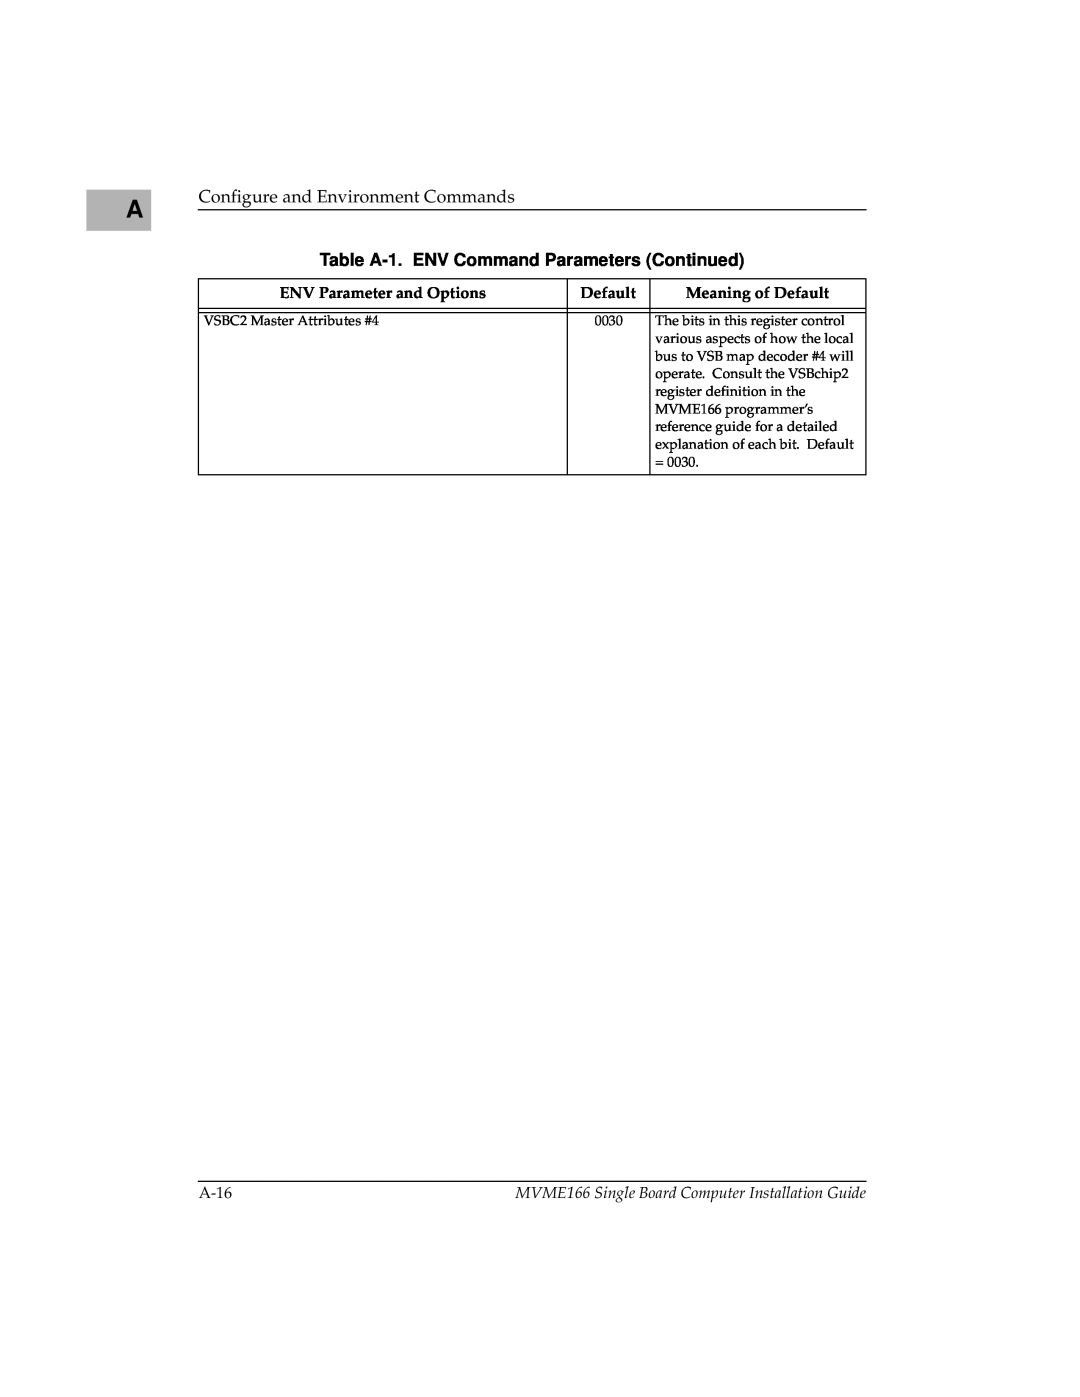 Motorola MVME166IG/D2 manual Table A-1. ENV Command Parameters Continued, ENV Parameter and Options, Meaning of Default 